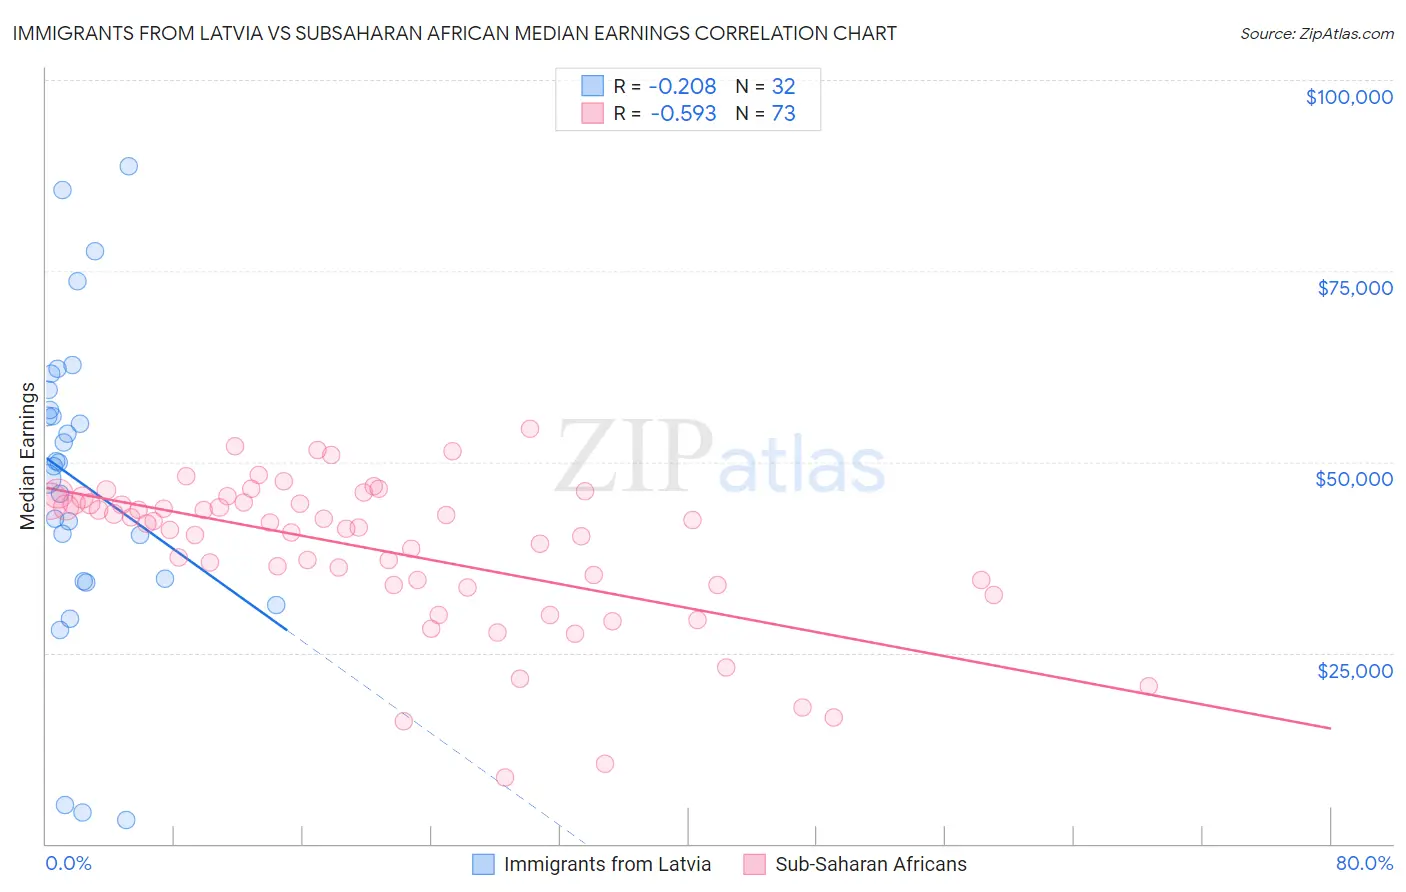 Immigrants from Latvia vs Subsaharan African Median Earnings